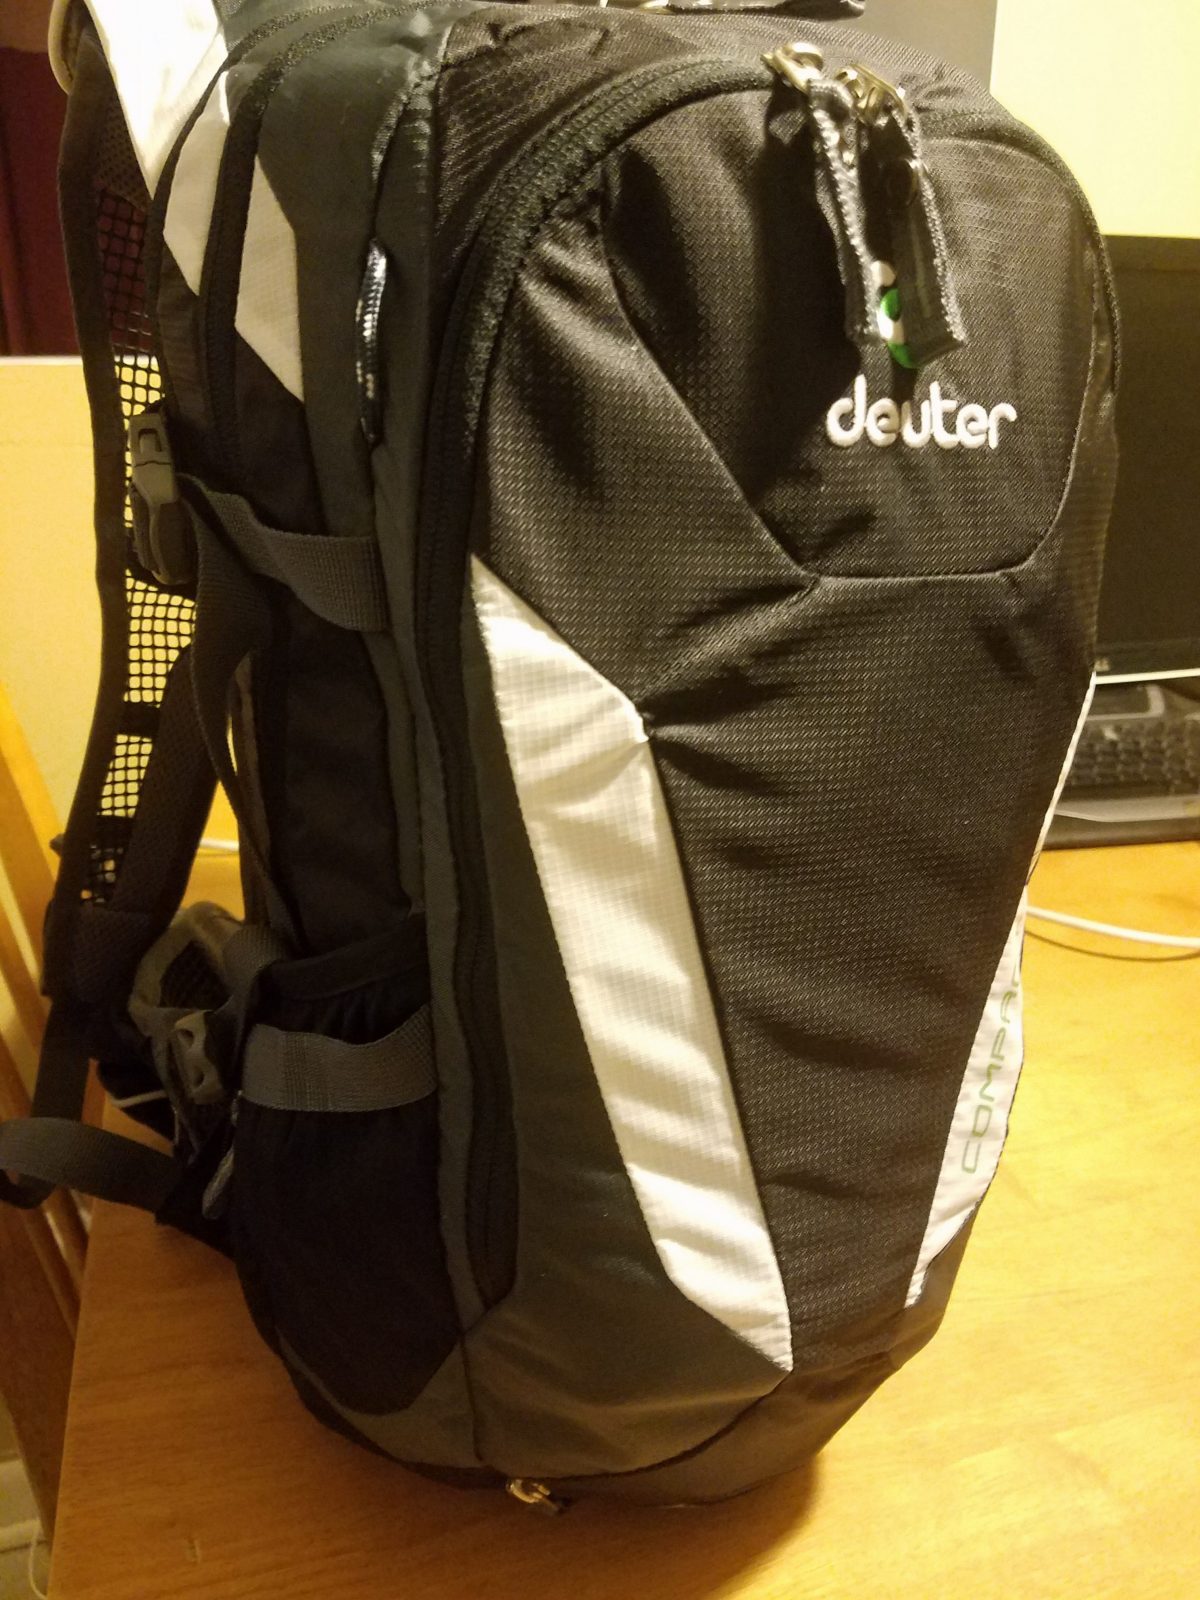 Deuter Compact EXP 12 Hydration Pack